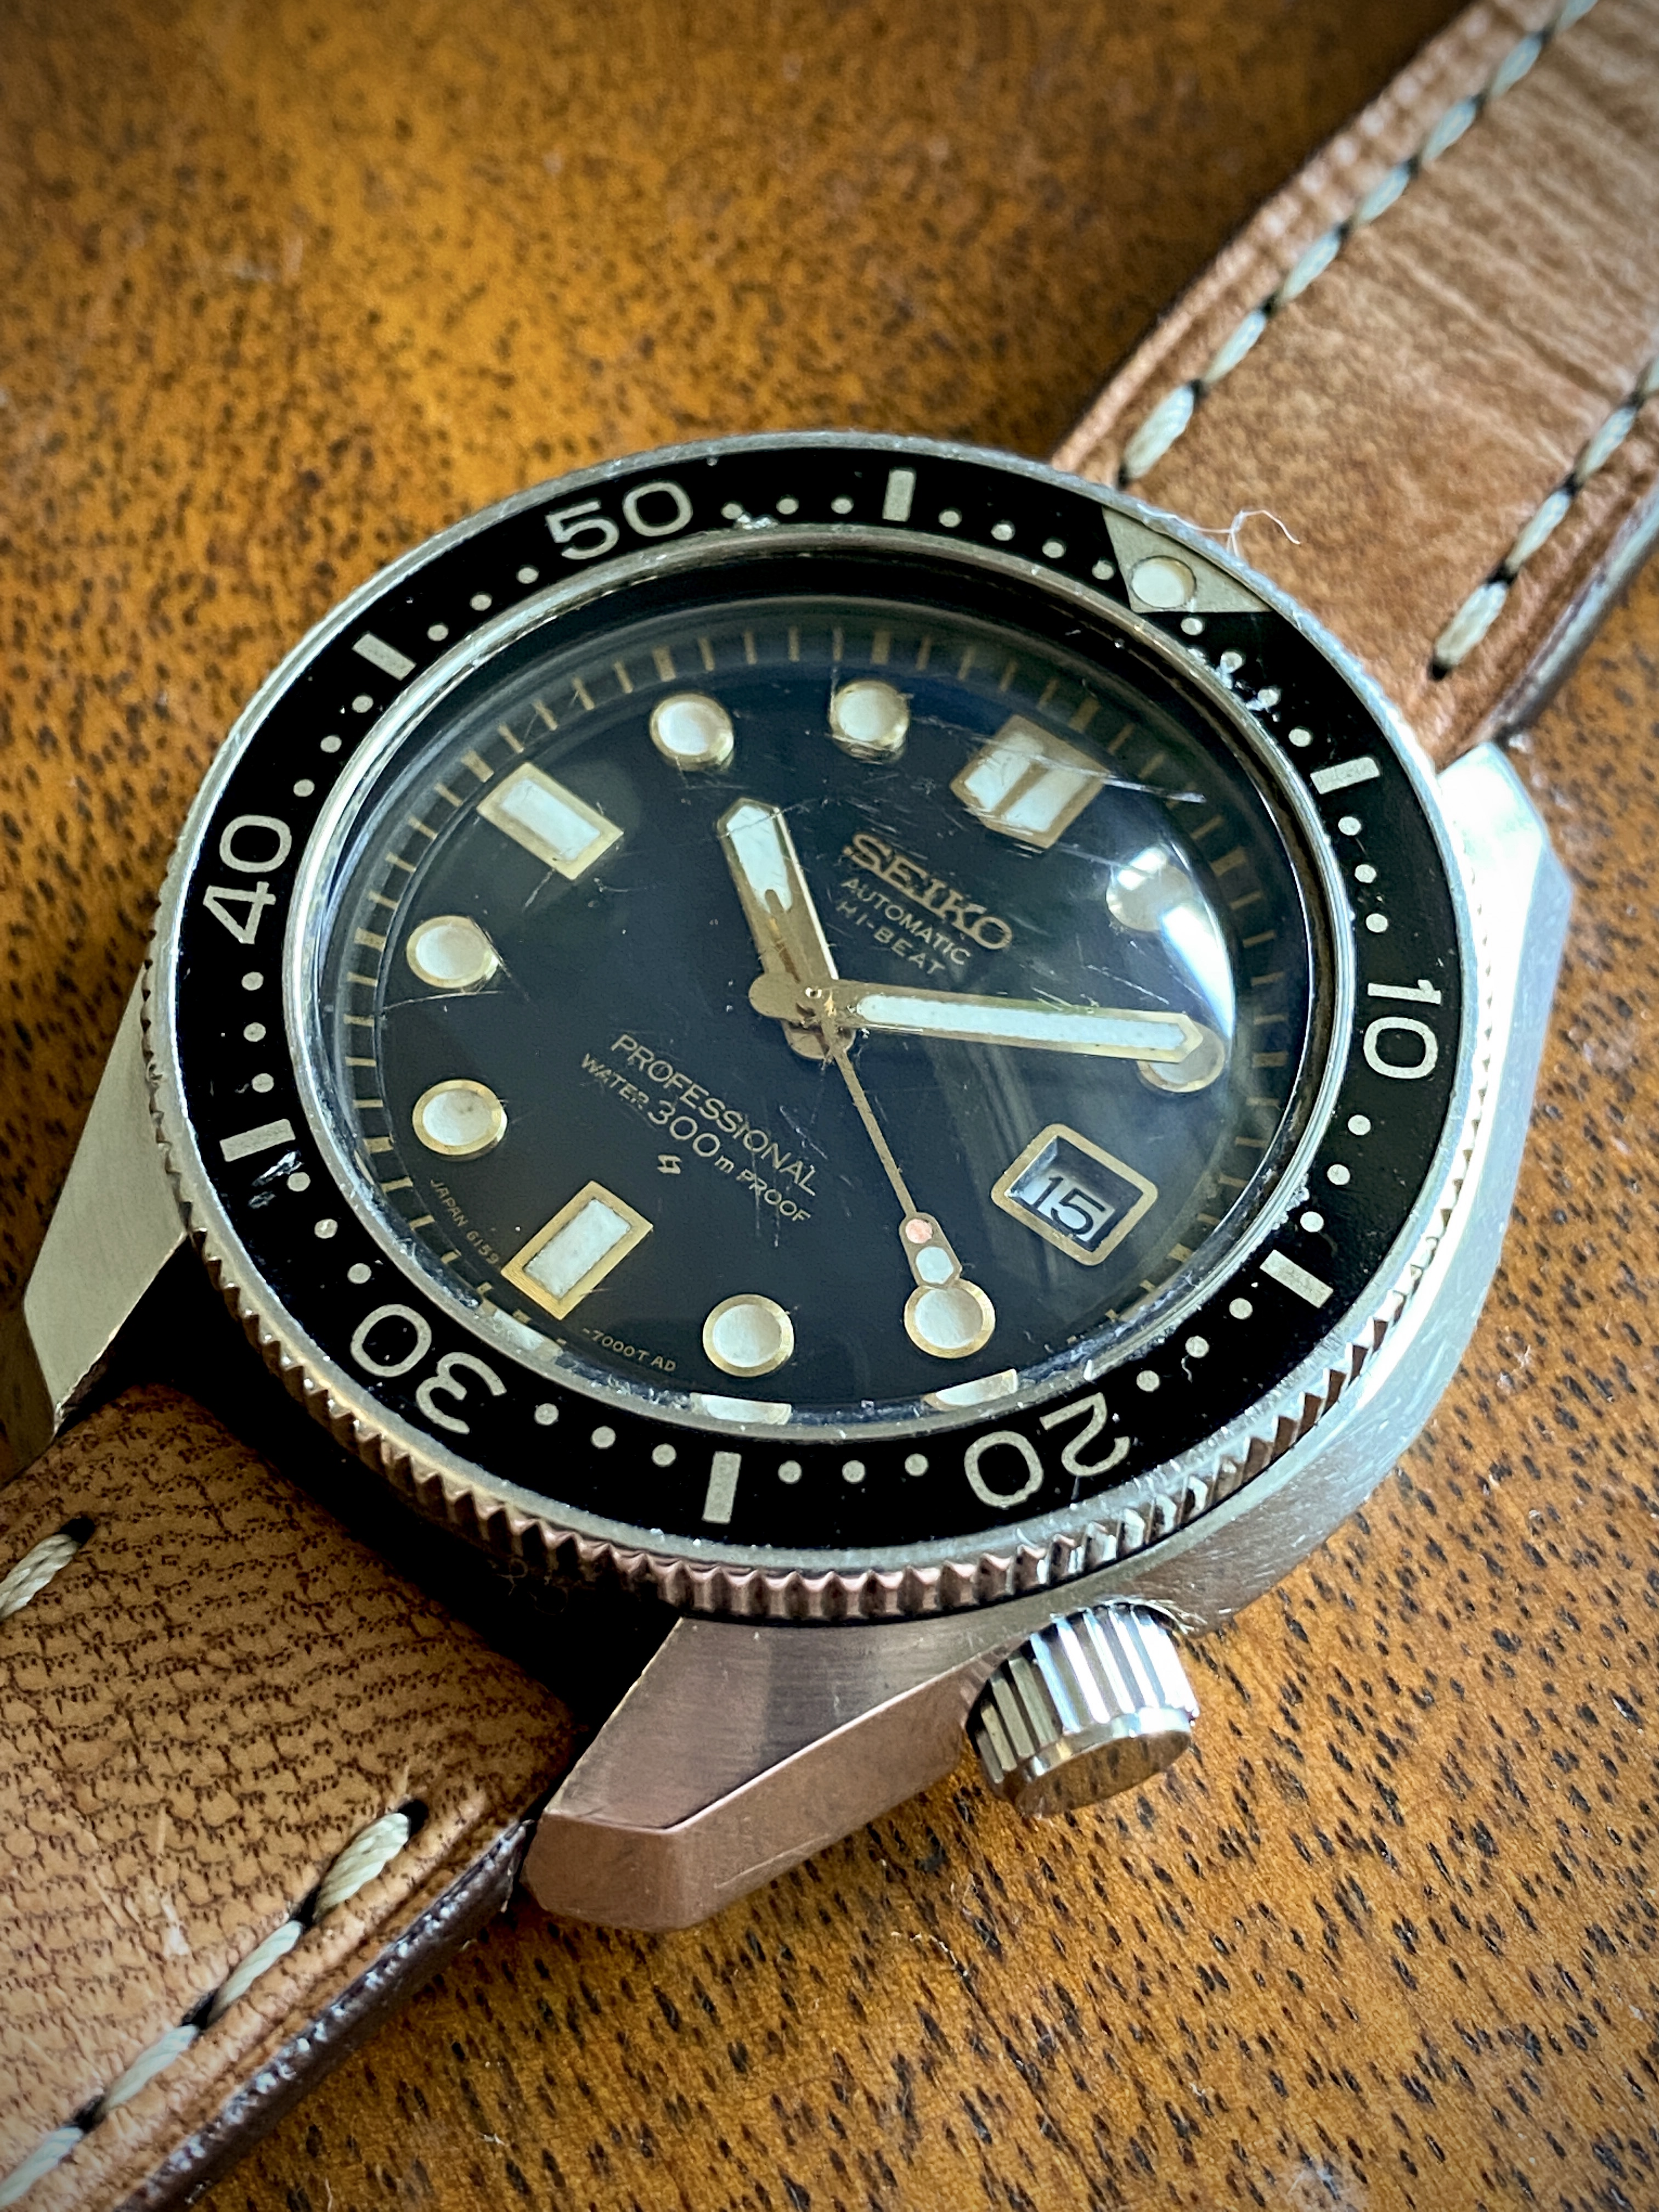 My End-Game Seiko: ref. 6159-7000 | Omega Forums